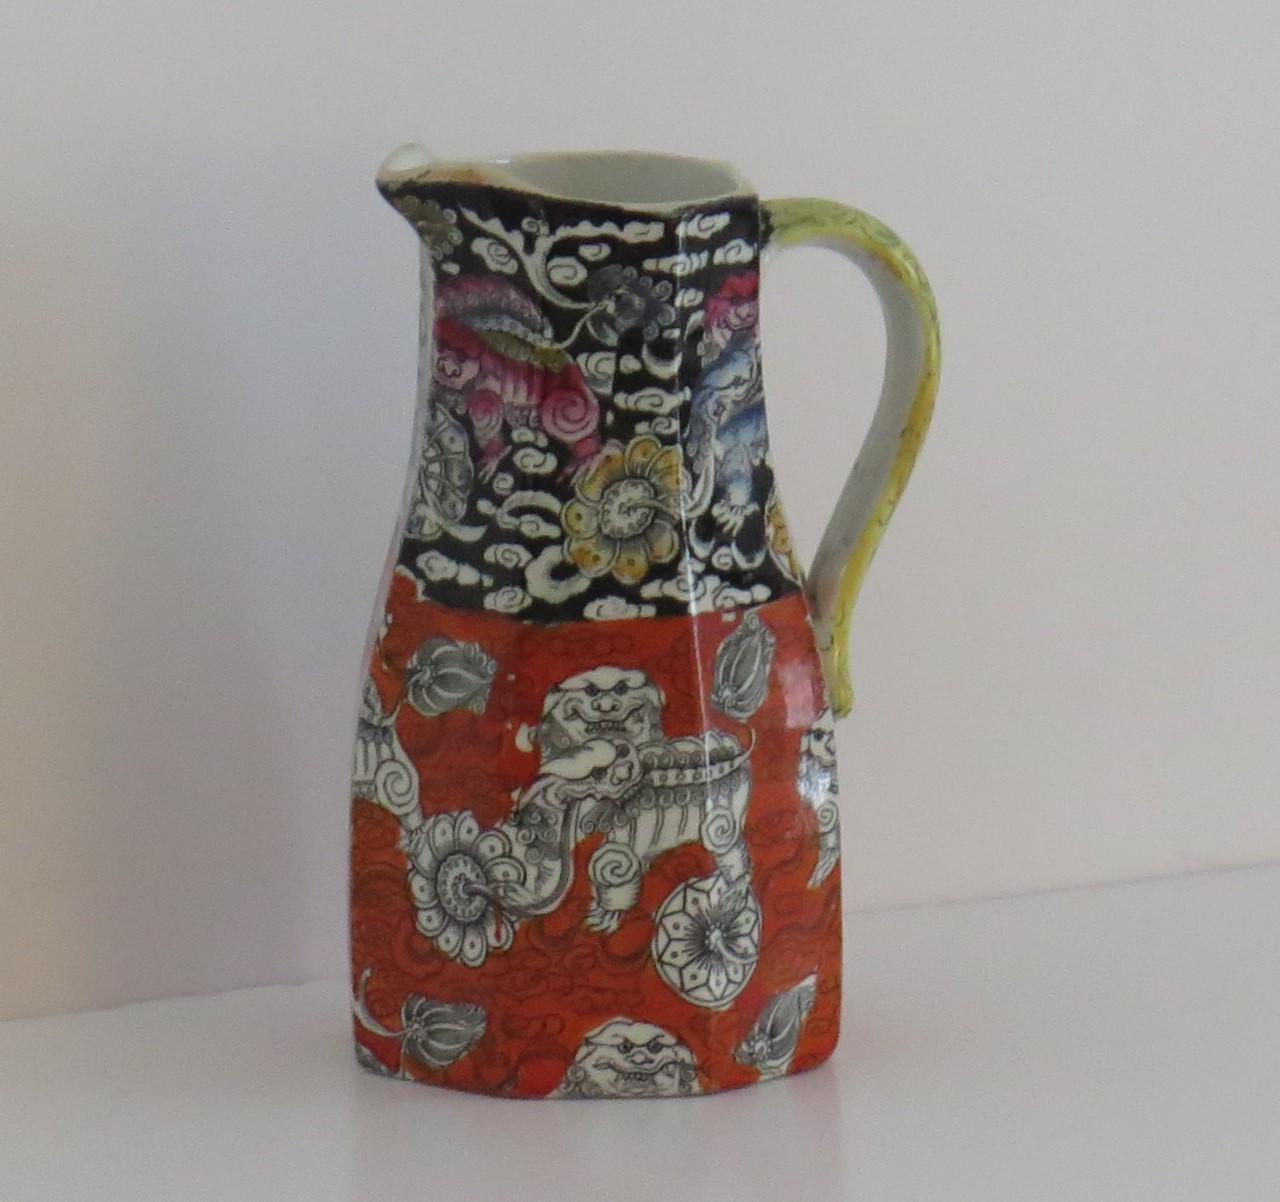 This is a rare shape jug made by Mason's Ironstone pottery. 

The jug is decorated with the chinoiserie influenced 